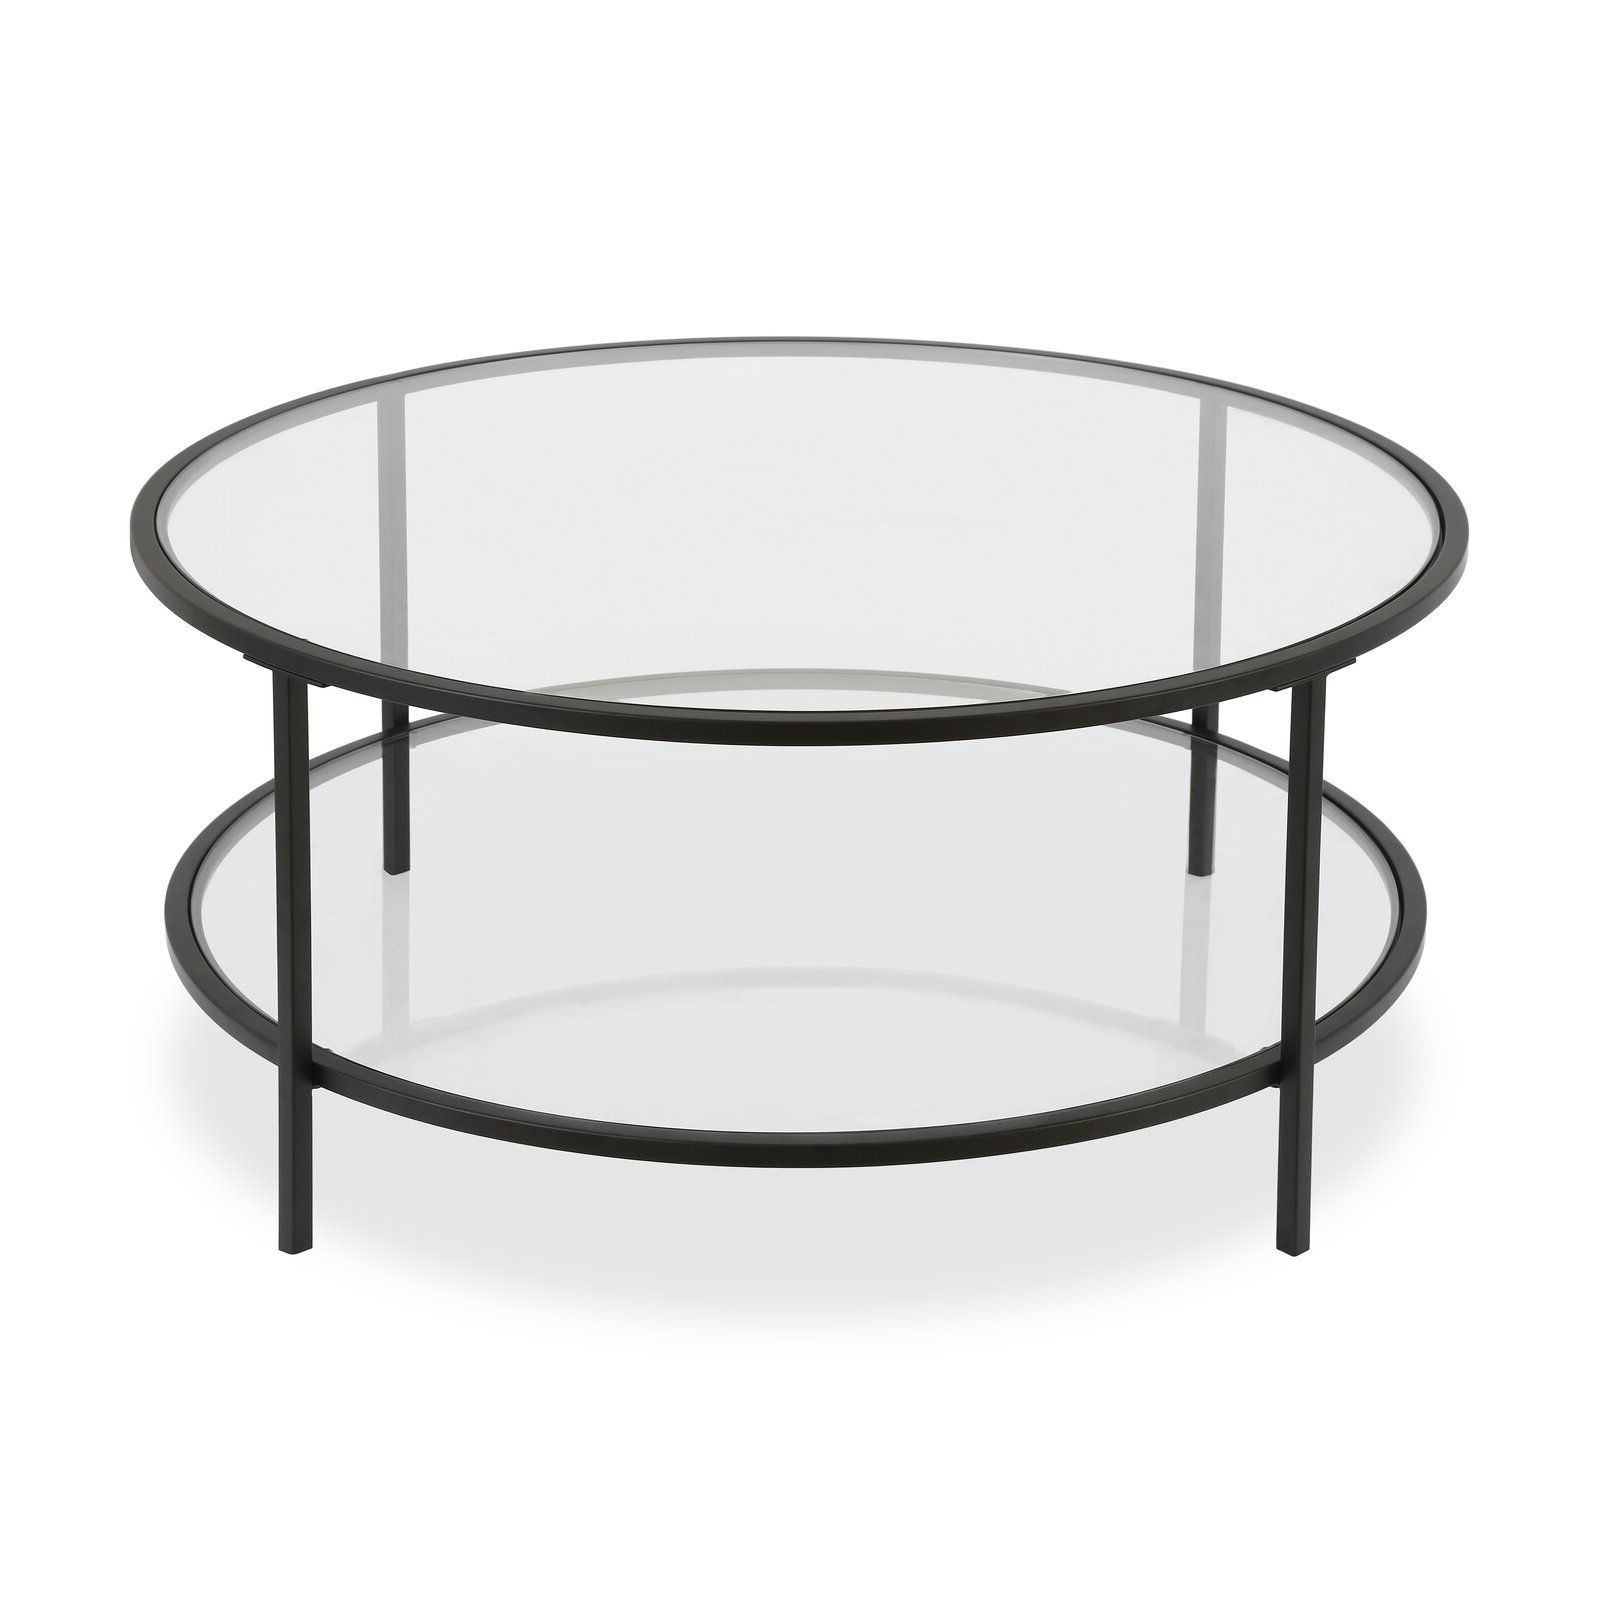 Favorite Places And Spaces Throughout Best And Newest Mitera Round Metal Glass Nesting Coffee Tables (View 14 of 20)